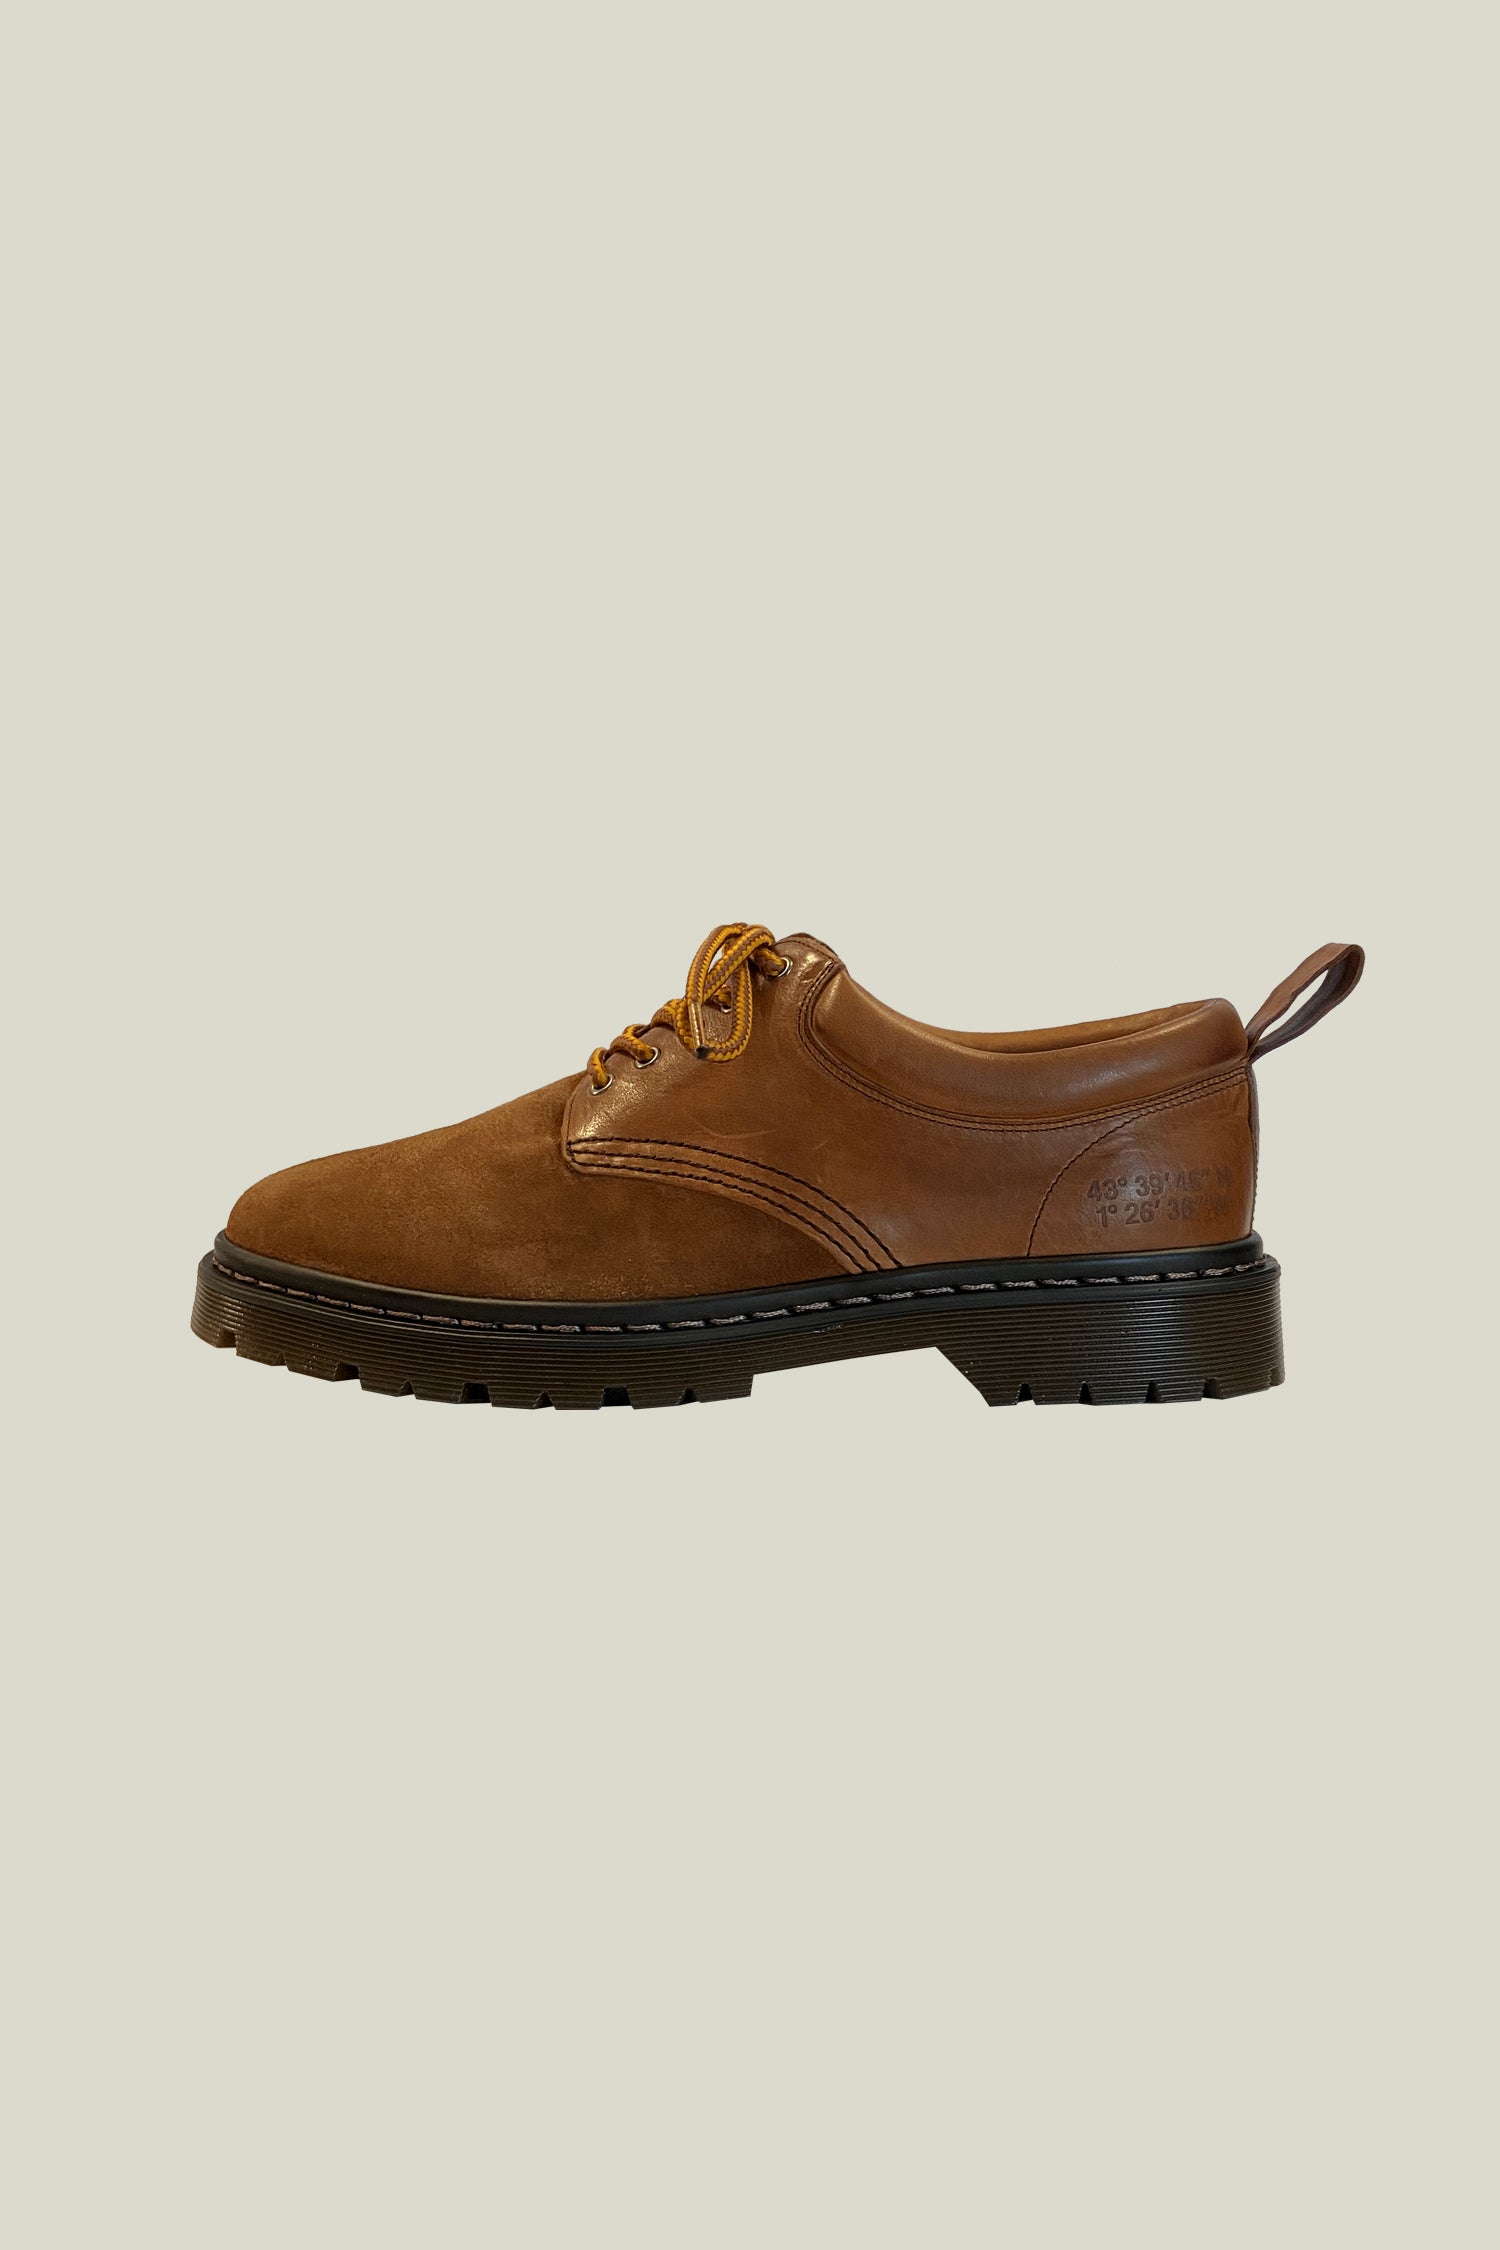 Chaussures "Patrol" - Camel